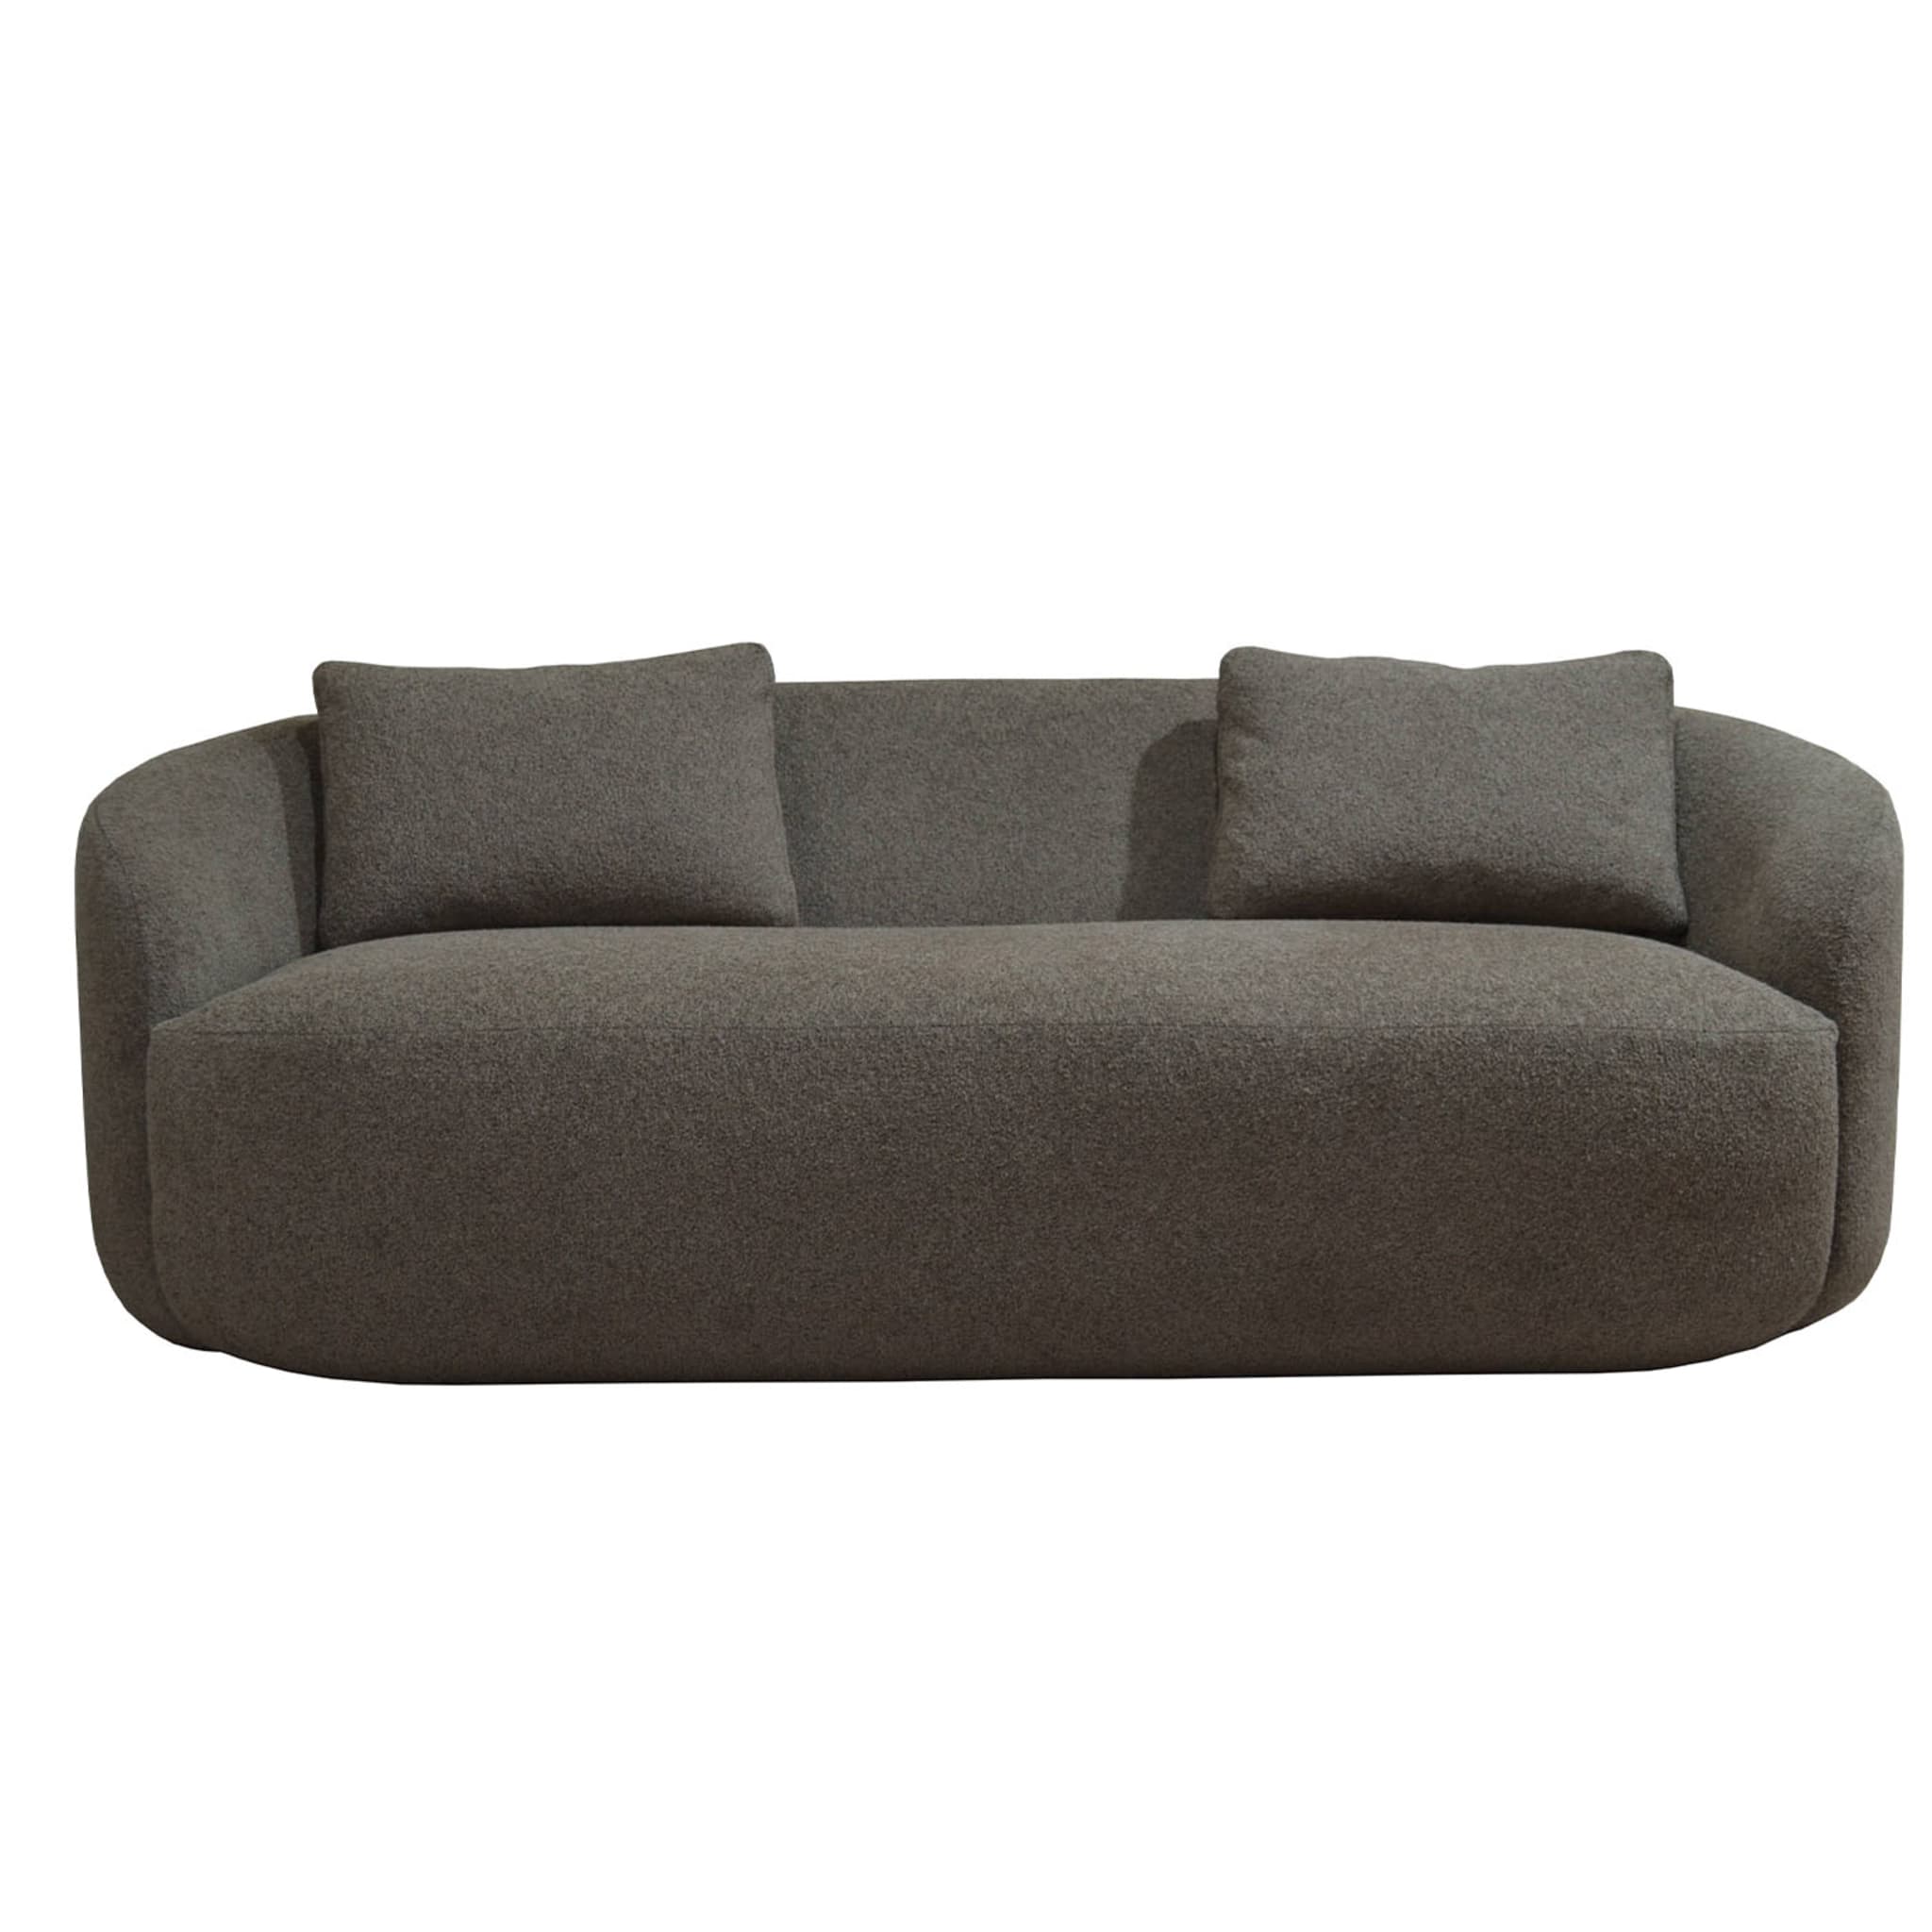 Cottonflower Sofa 200 In Brown Cotton Boucle - Alternative view 1